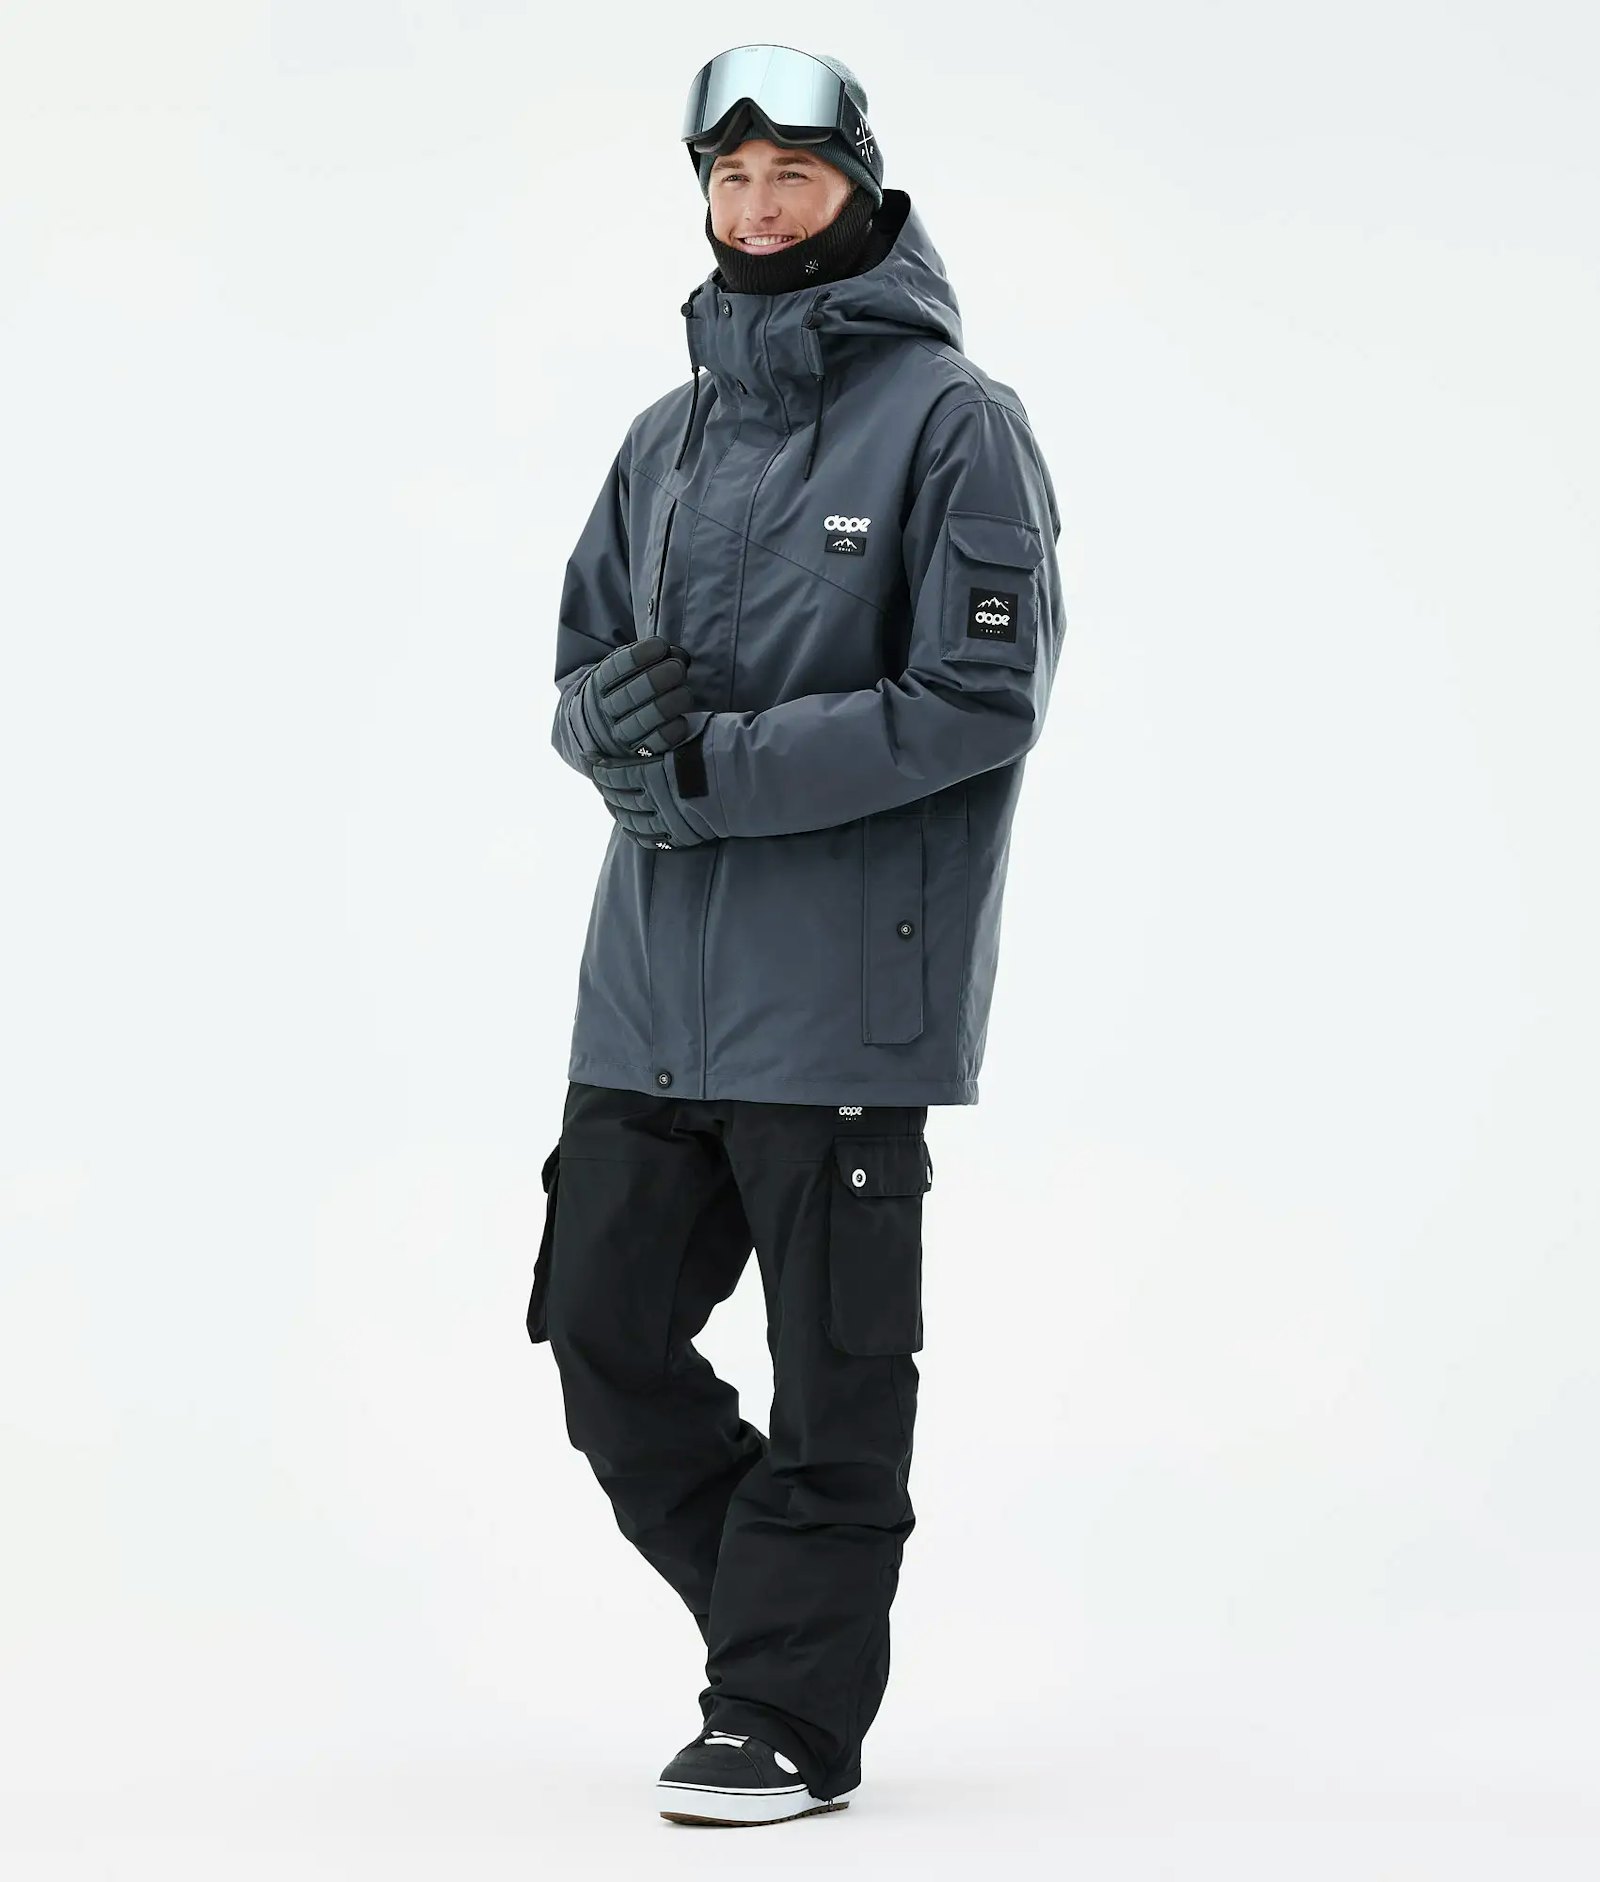 Adept Outfit Snowboard Homme Metal Blue/Black